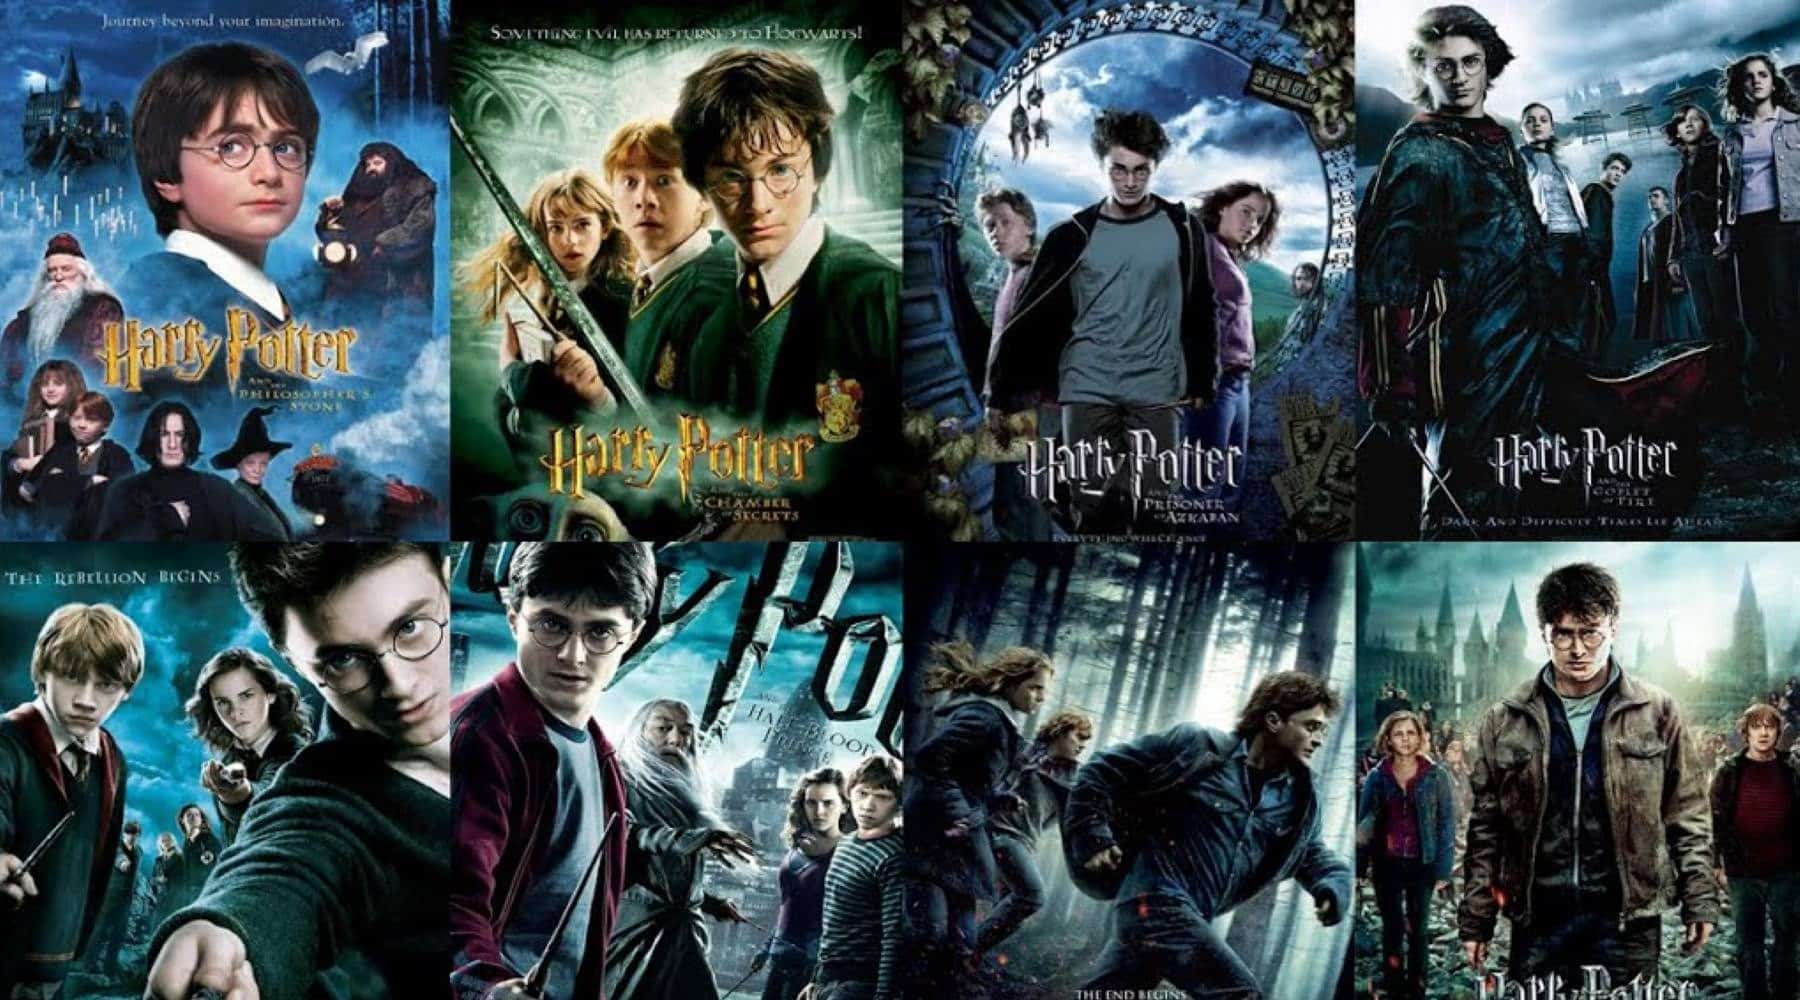 Every Harry Potter film now available to stream in Australia